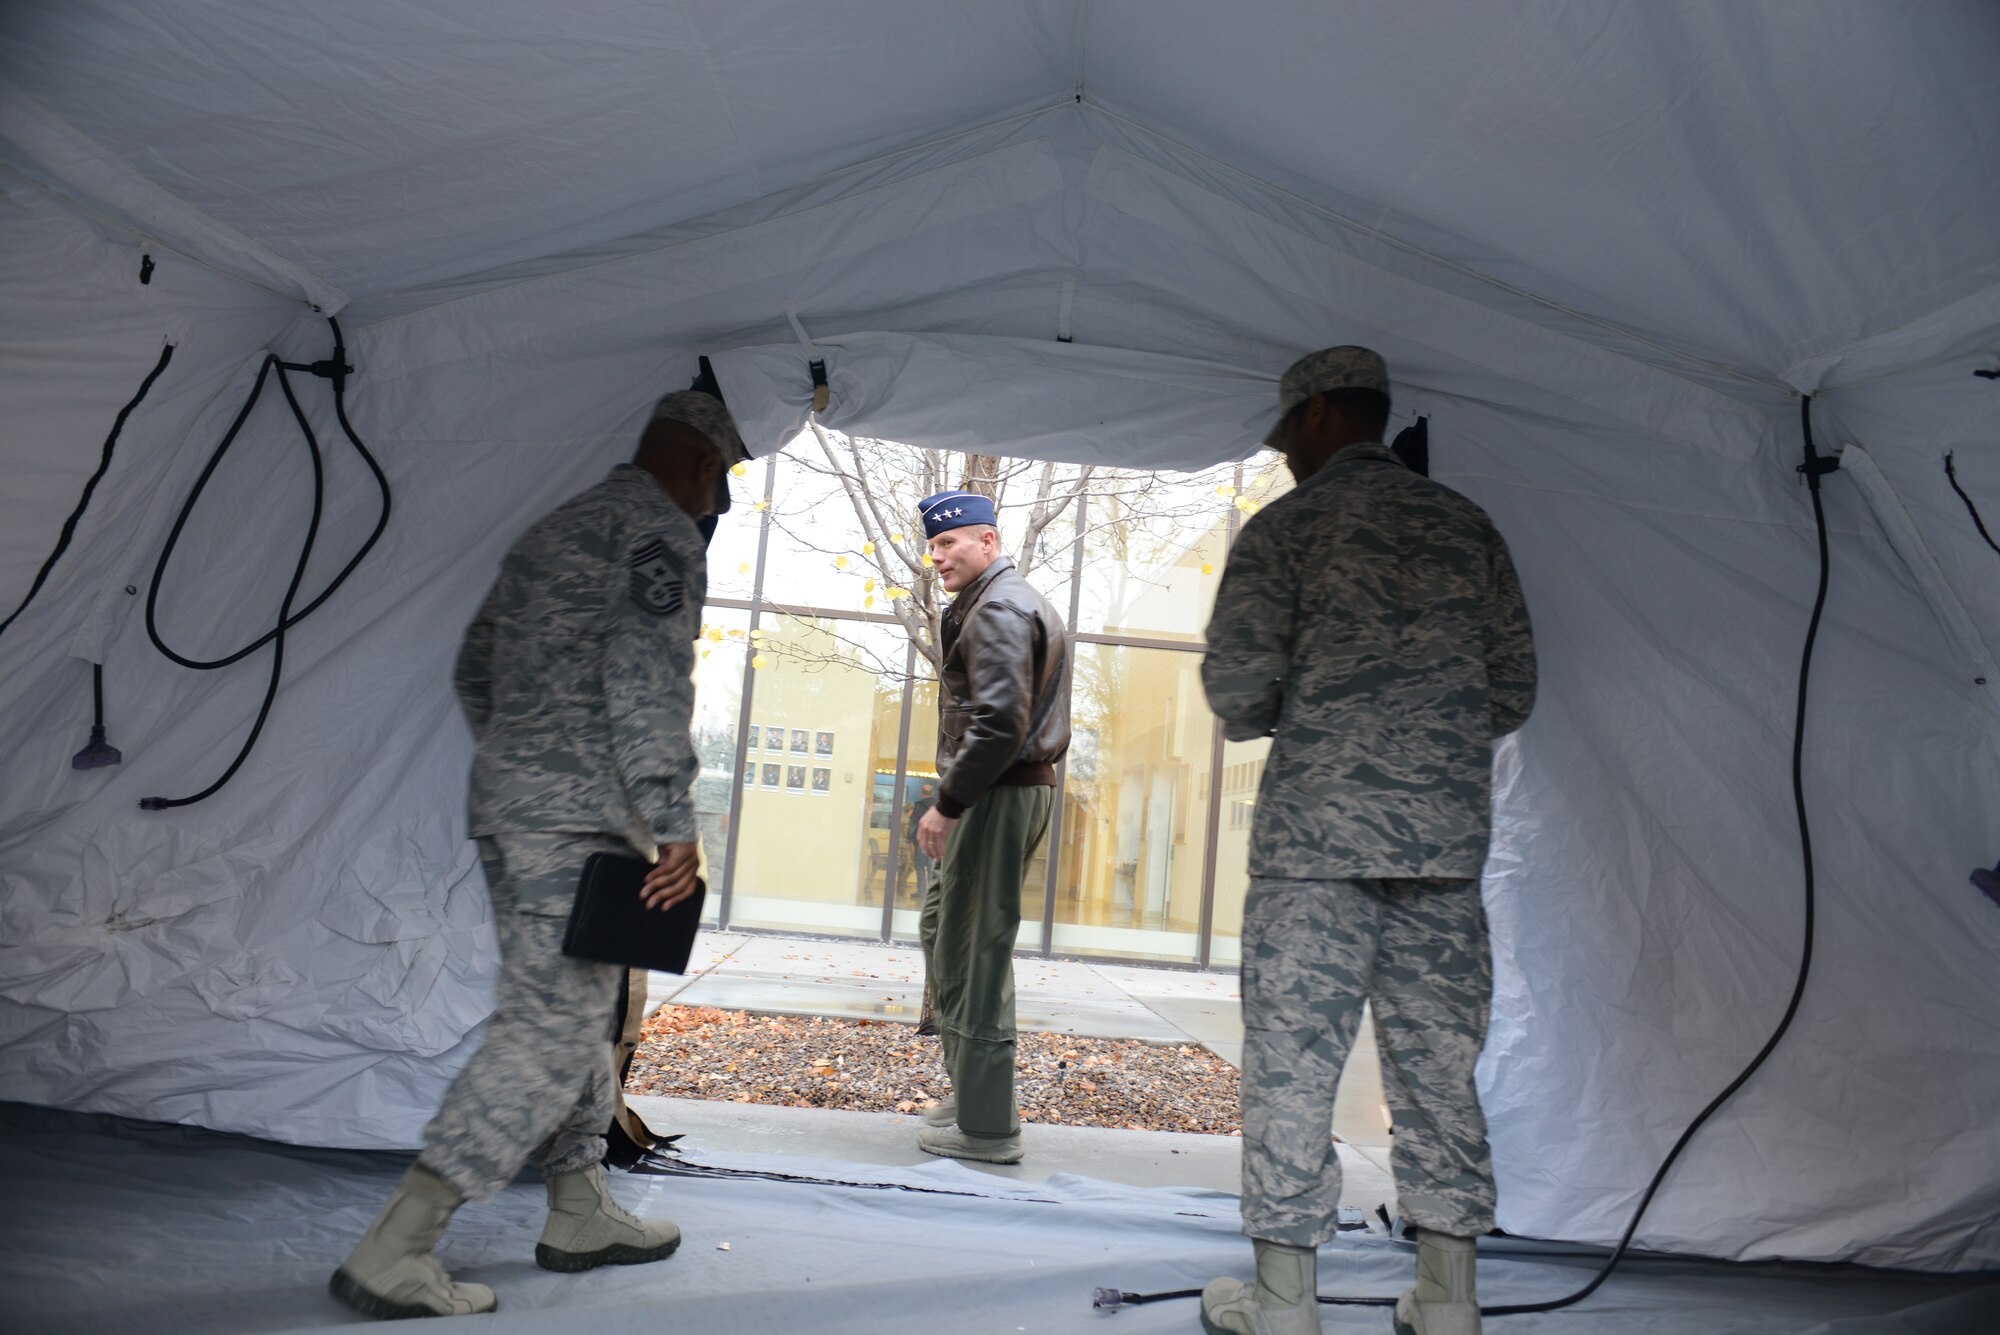 U.S. Air Force Lt. Gen. Tod Wolters, 12th Air Force (Air Forces Southern) commander, exits a tent Nov. 19, 2013, at Mountain Home Air Force Base, Idaho. General Wolters received a tour of the MHAFB hospital which is a full service 10-bed community-based hospital of more than 397 military and civilian members. (U.S. Air Force photo by Senior Airman Benjamin Sutton/Released)